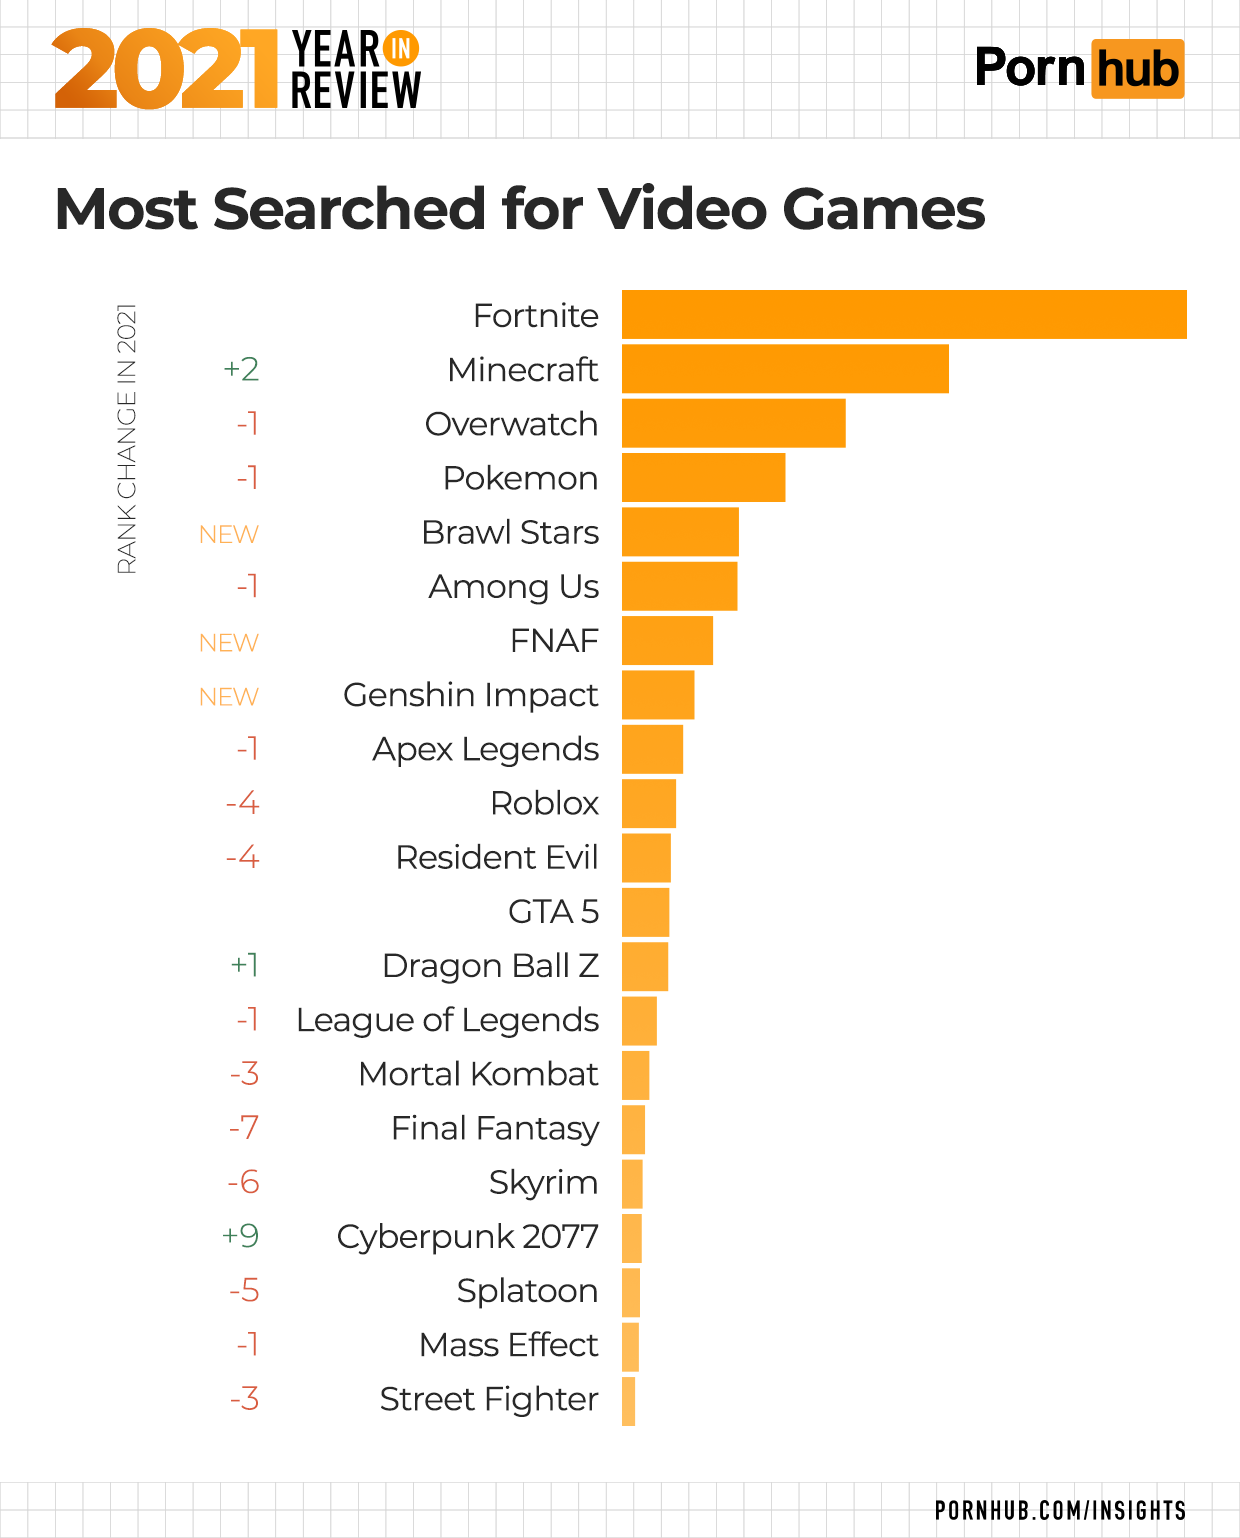 Most popular video game porn